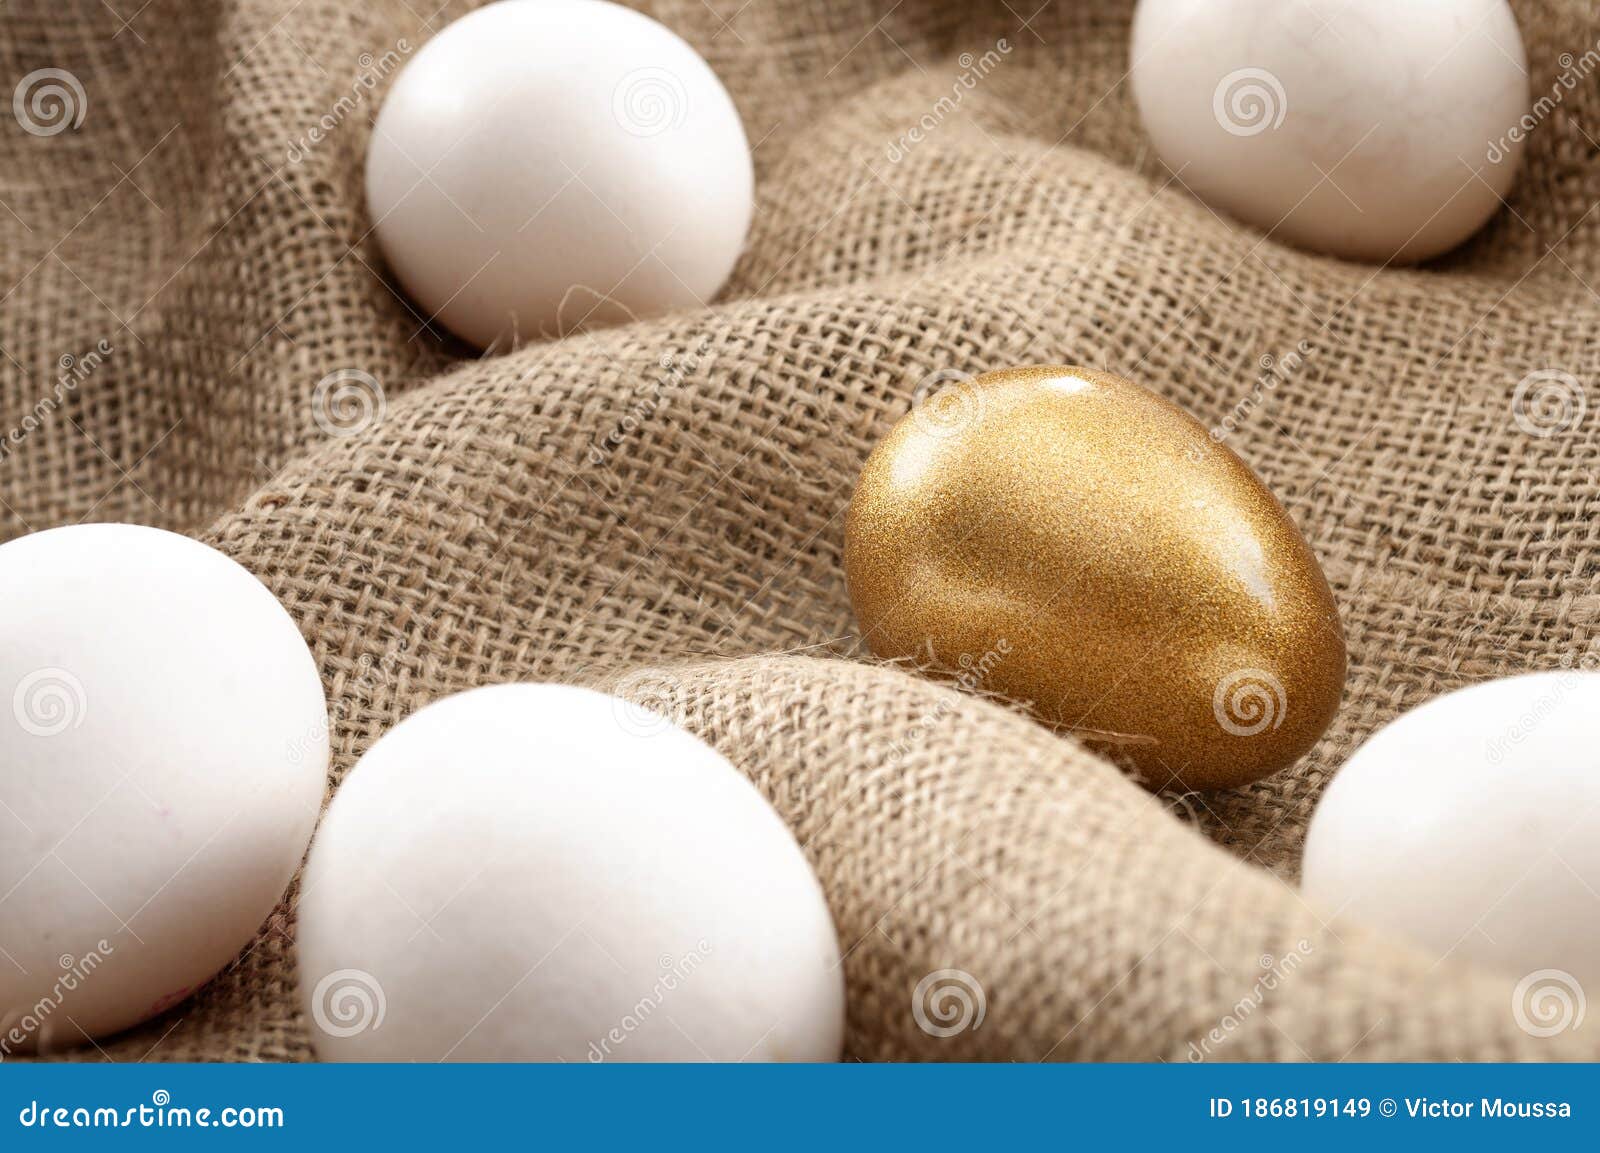 metaphors for successful leadership and retirement investment concept with white eggs and one single gold egg on burlap sack